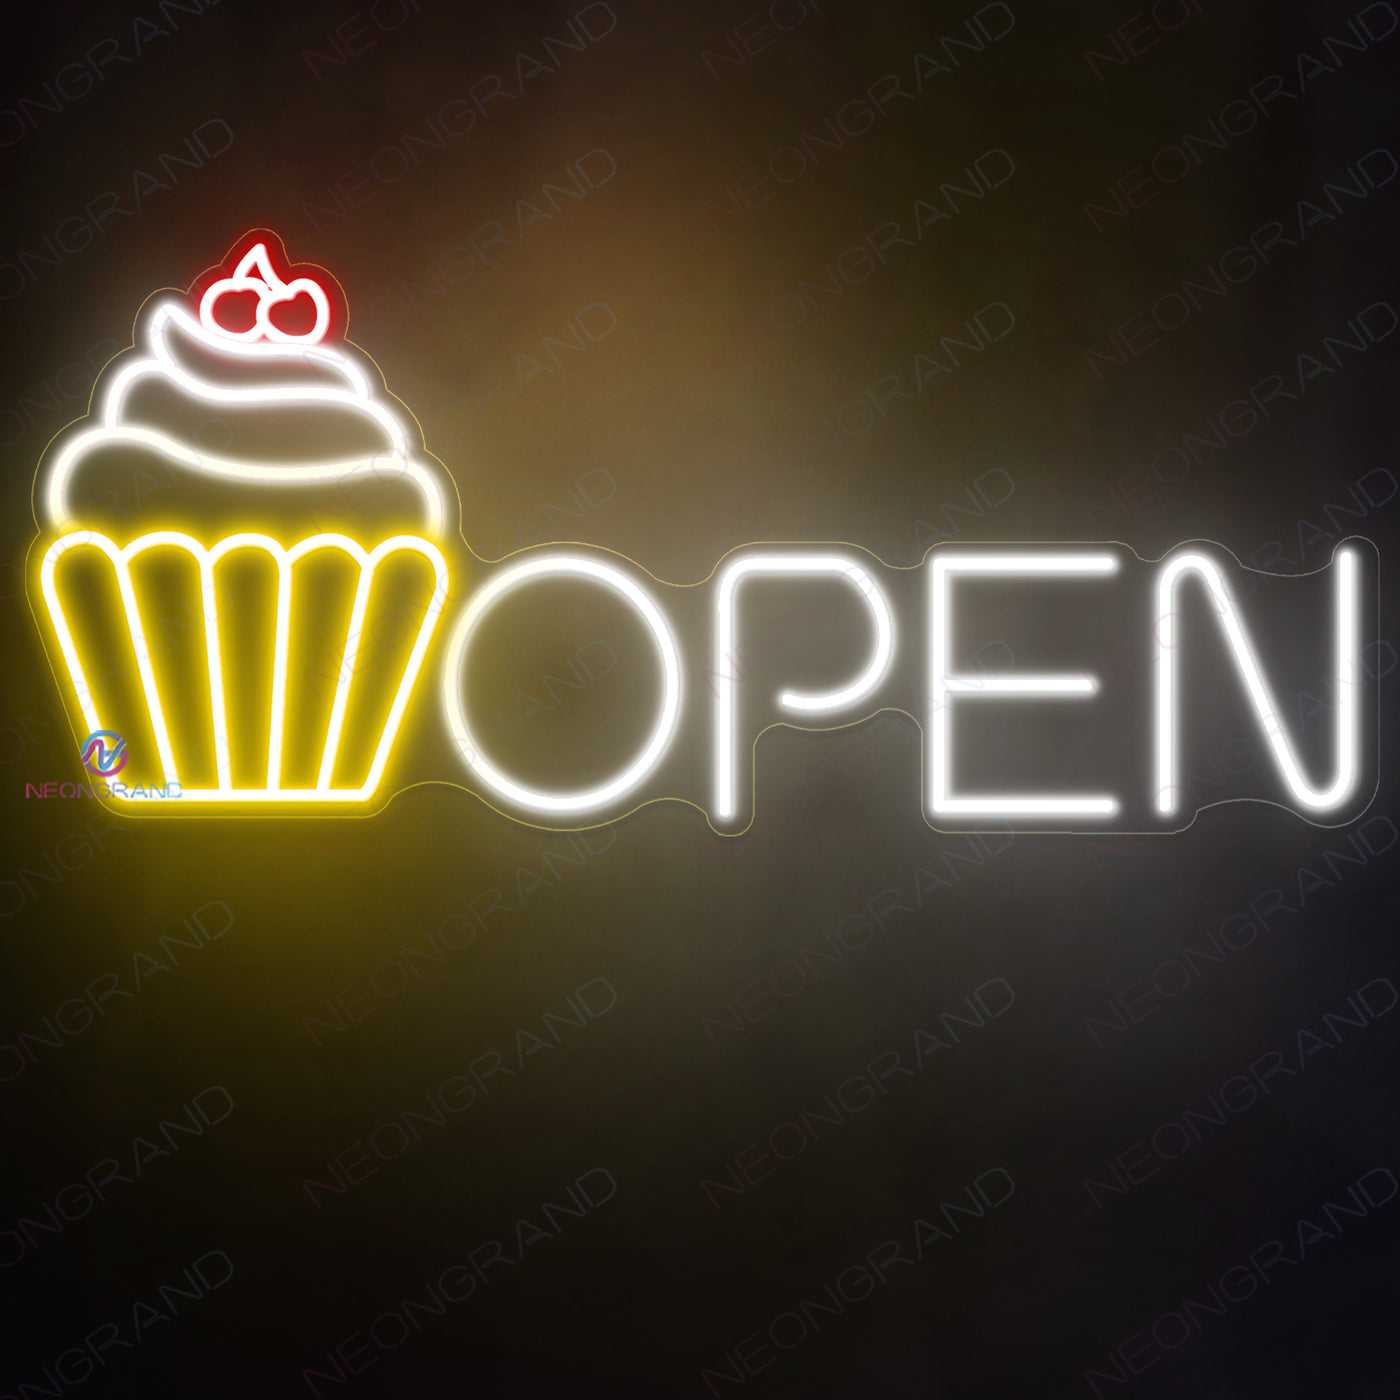 Neon Cupcake Open Sign Business Led Light